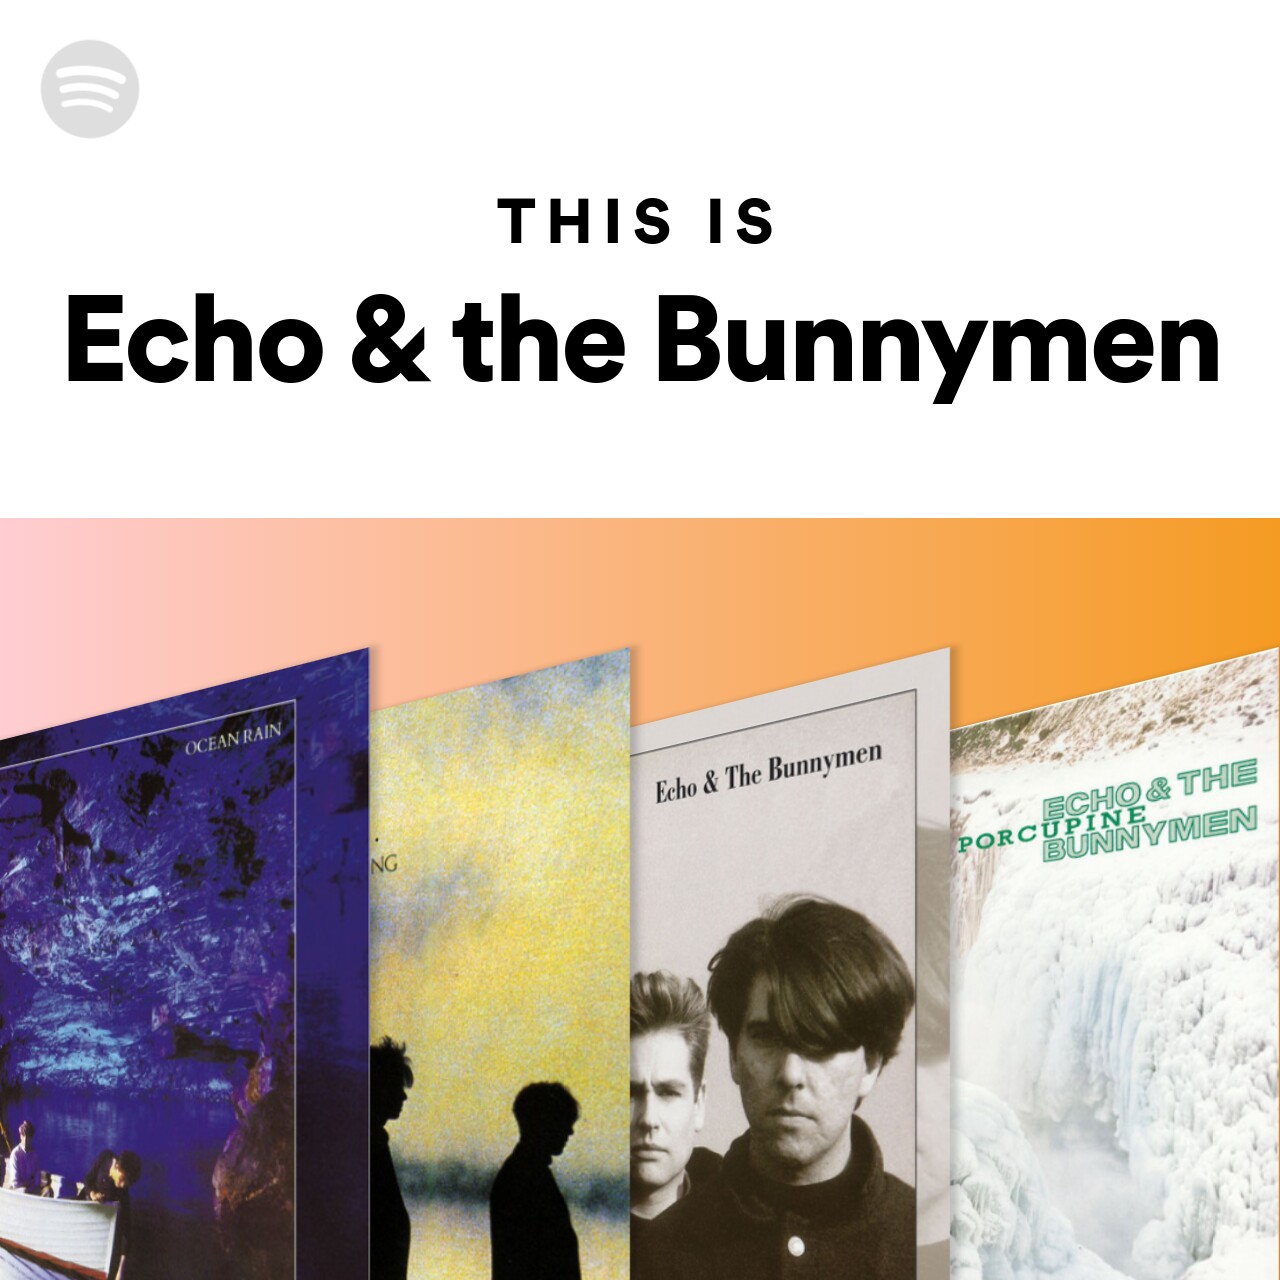 This Is Echo & the Bunnymen